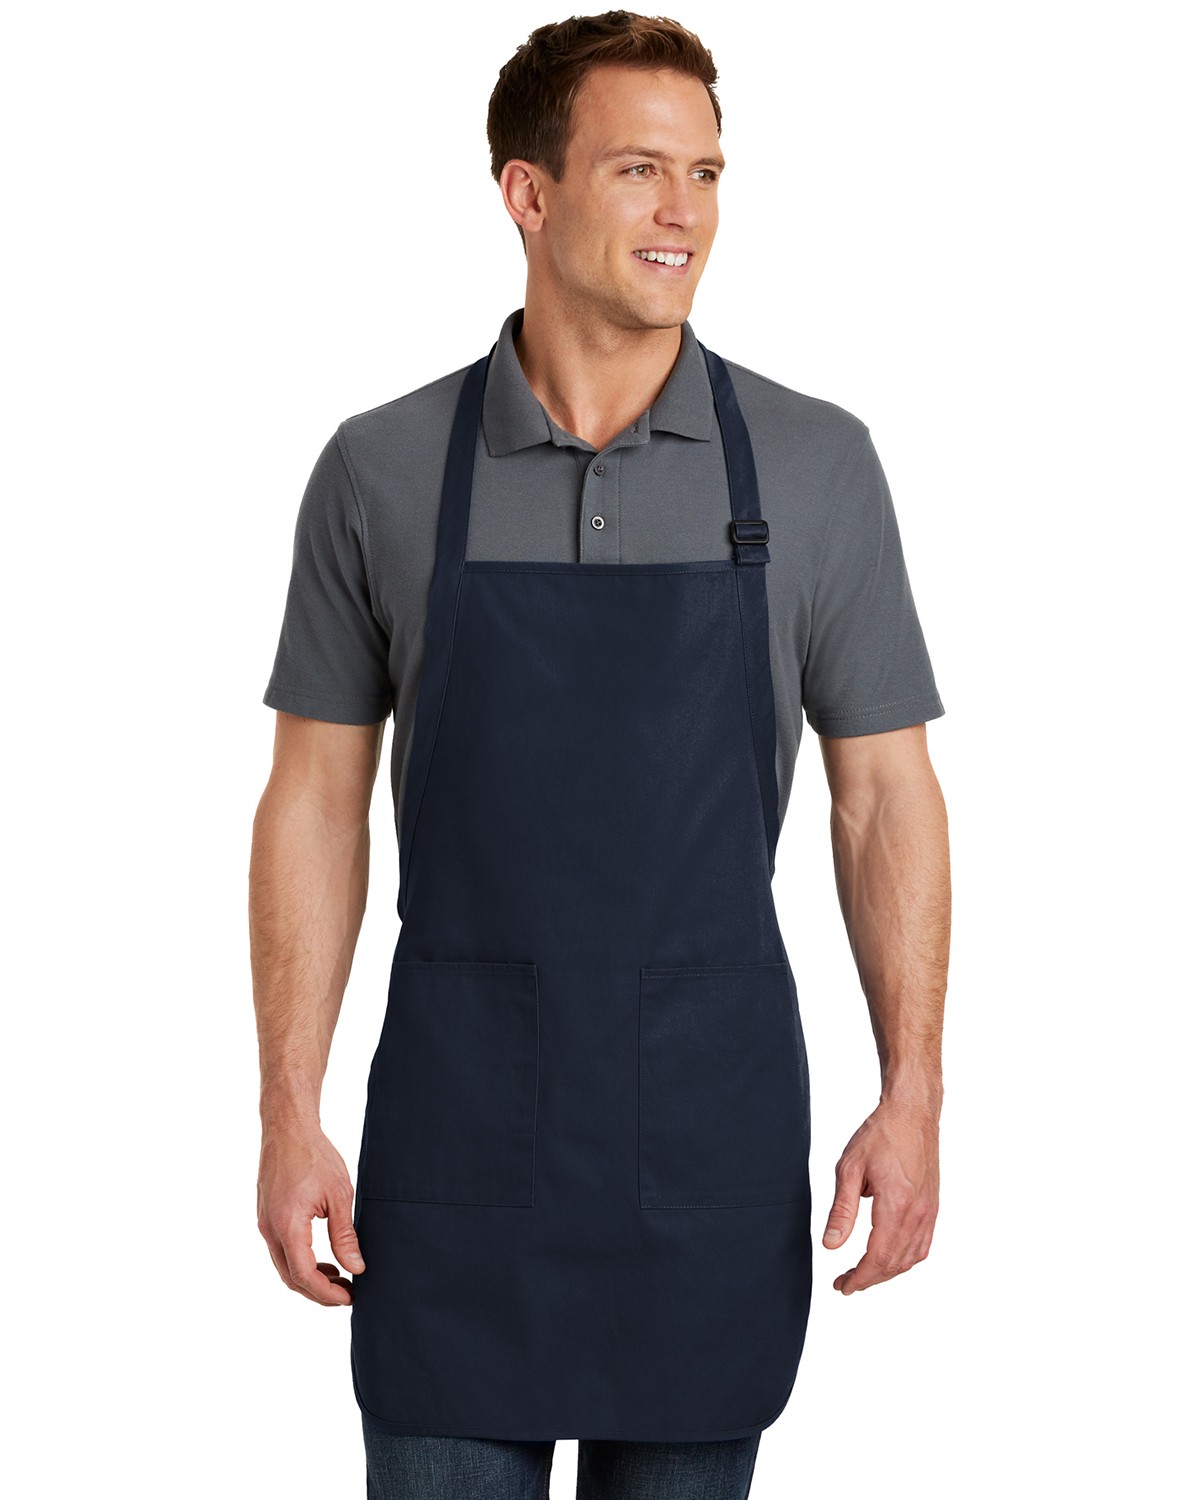 Port Authority A500 Full Length Apron with Pockets